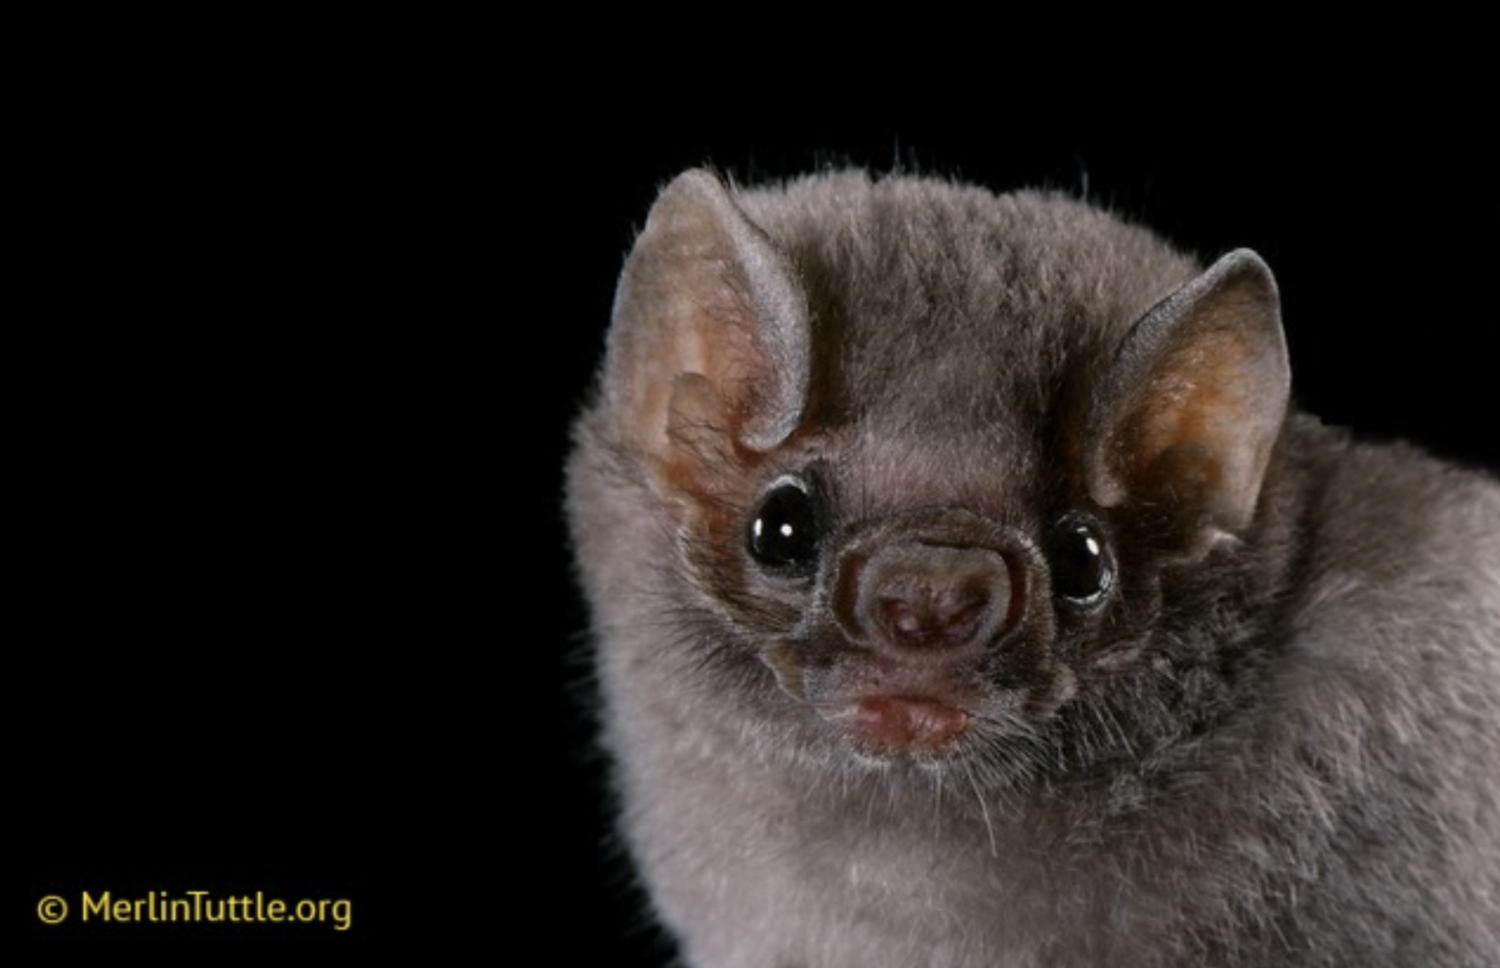 Photo by Merlin Tuttle of a Hairy-legged vampire bat (Diphylla ecaudata) from Mexico